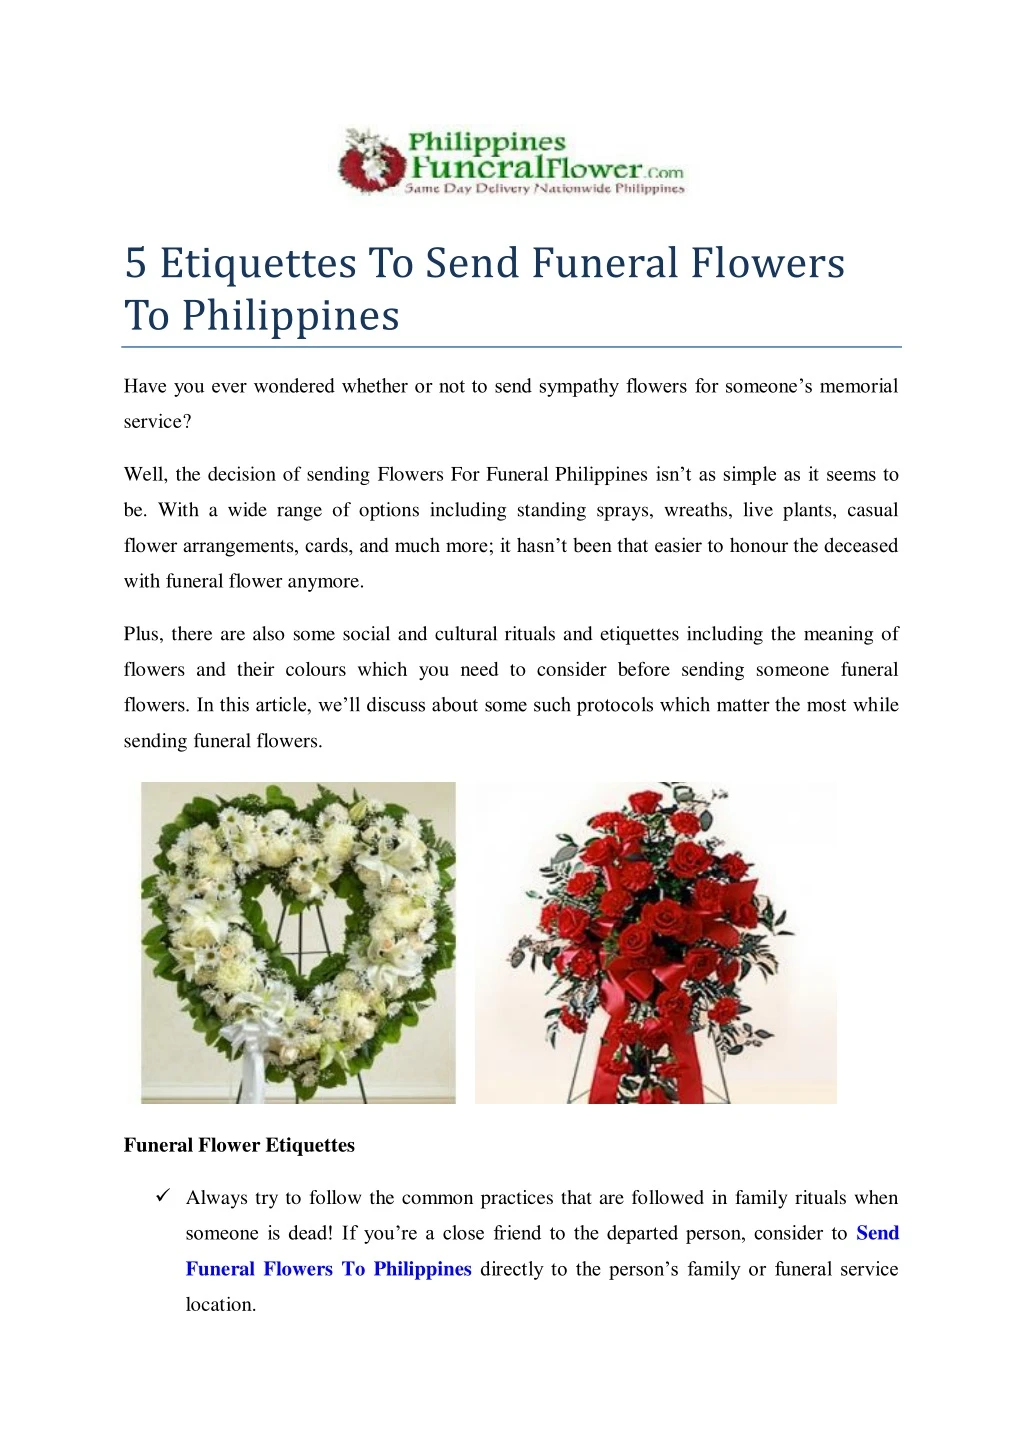 5 etiquettes to send funeral flowers